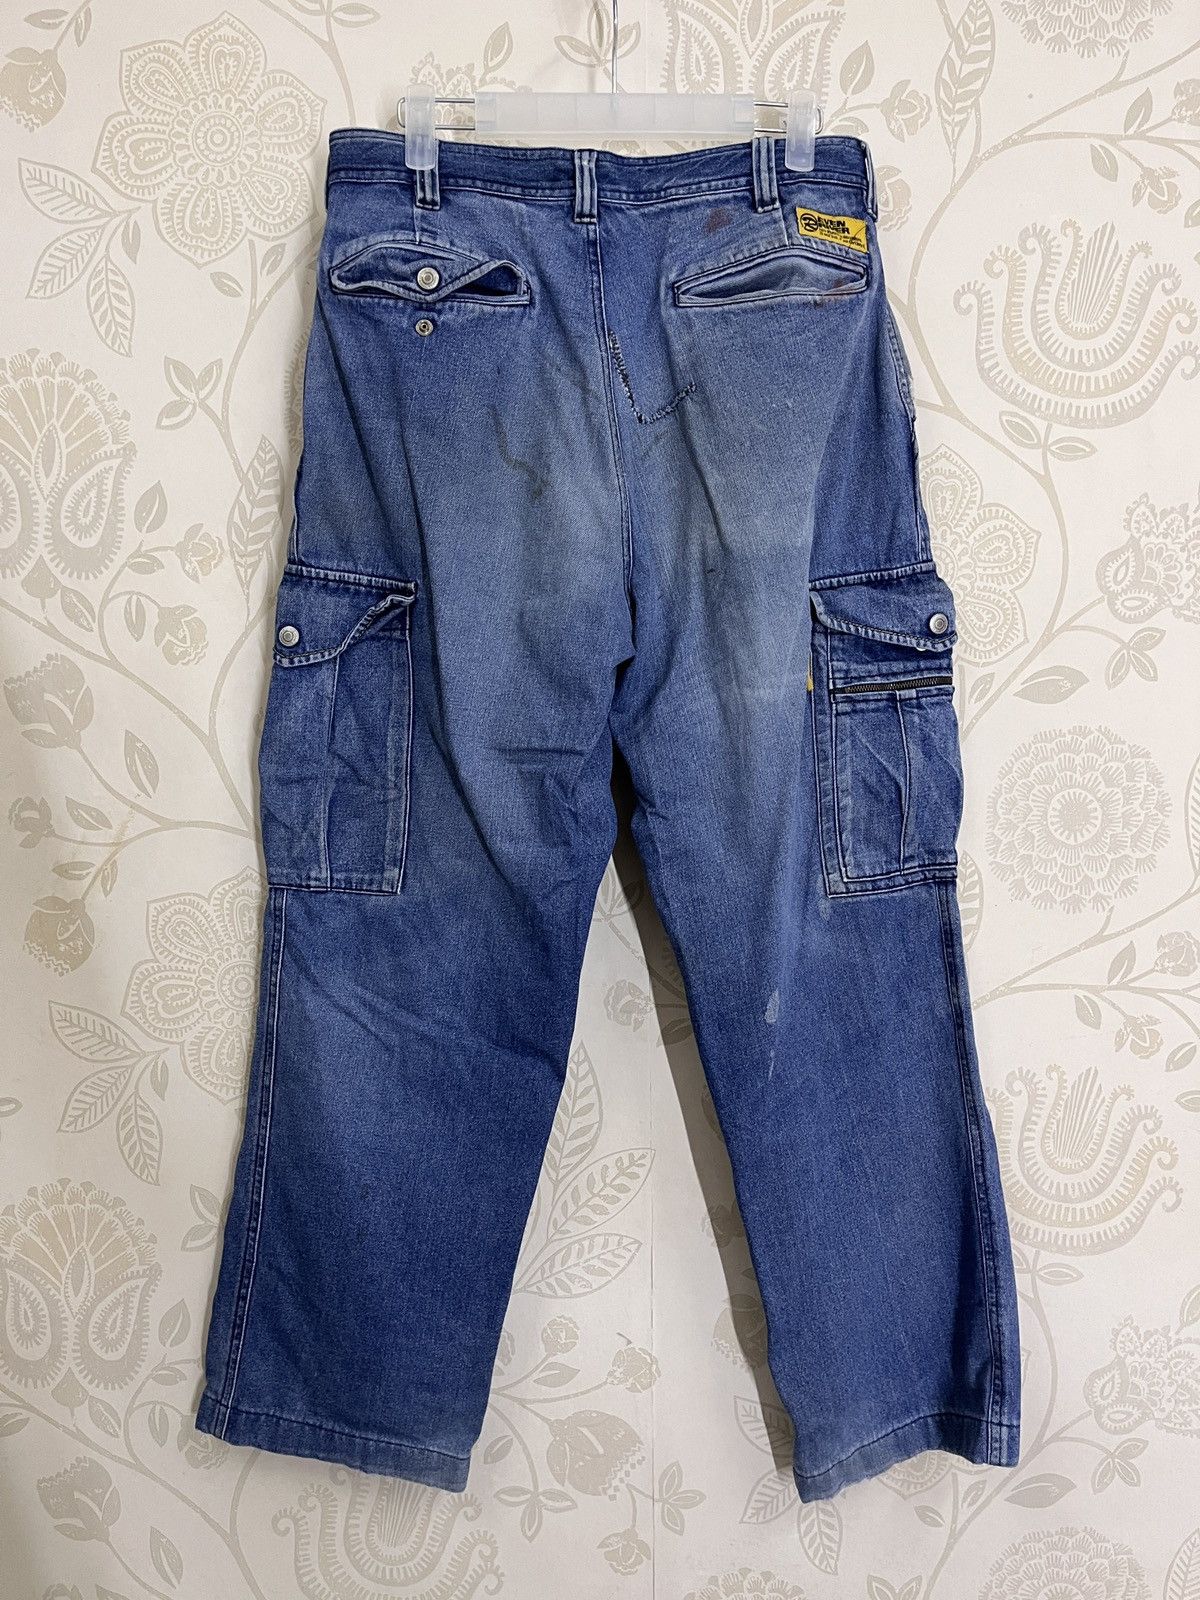 Distressed Denim - Worn Even River Japanese Cargo Denim Ripped Baggy Style - 2